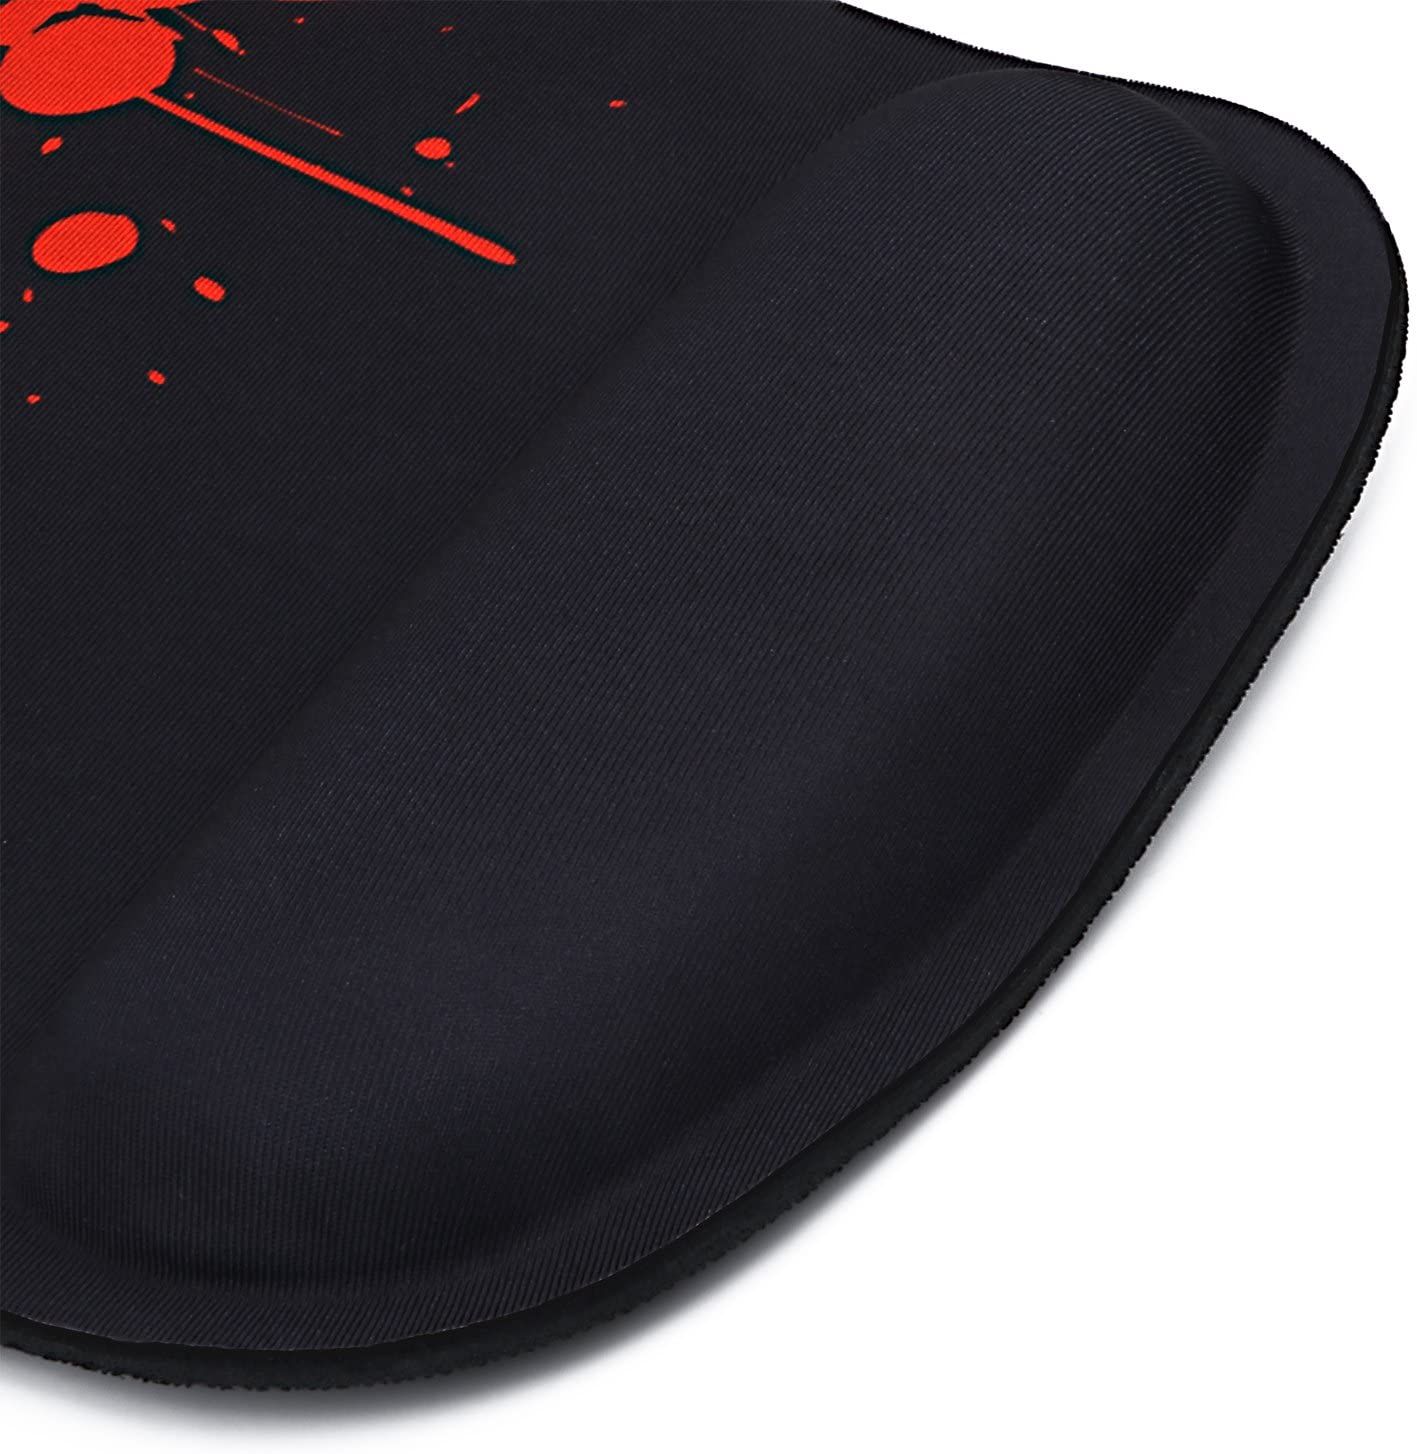 The Best Mouse Pads for Gamers in 2020